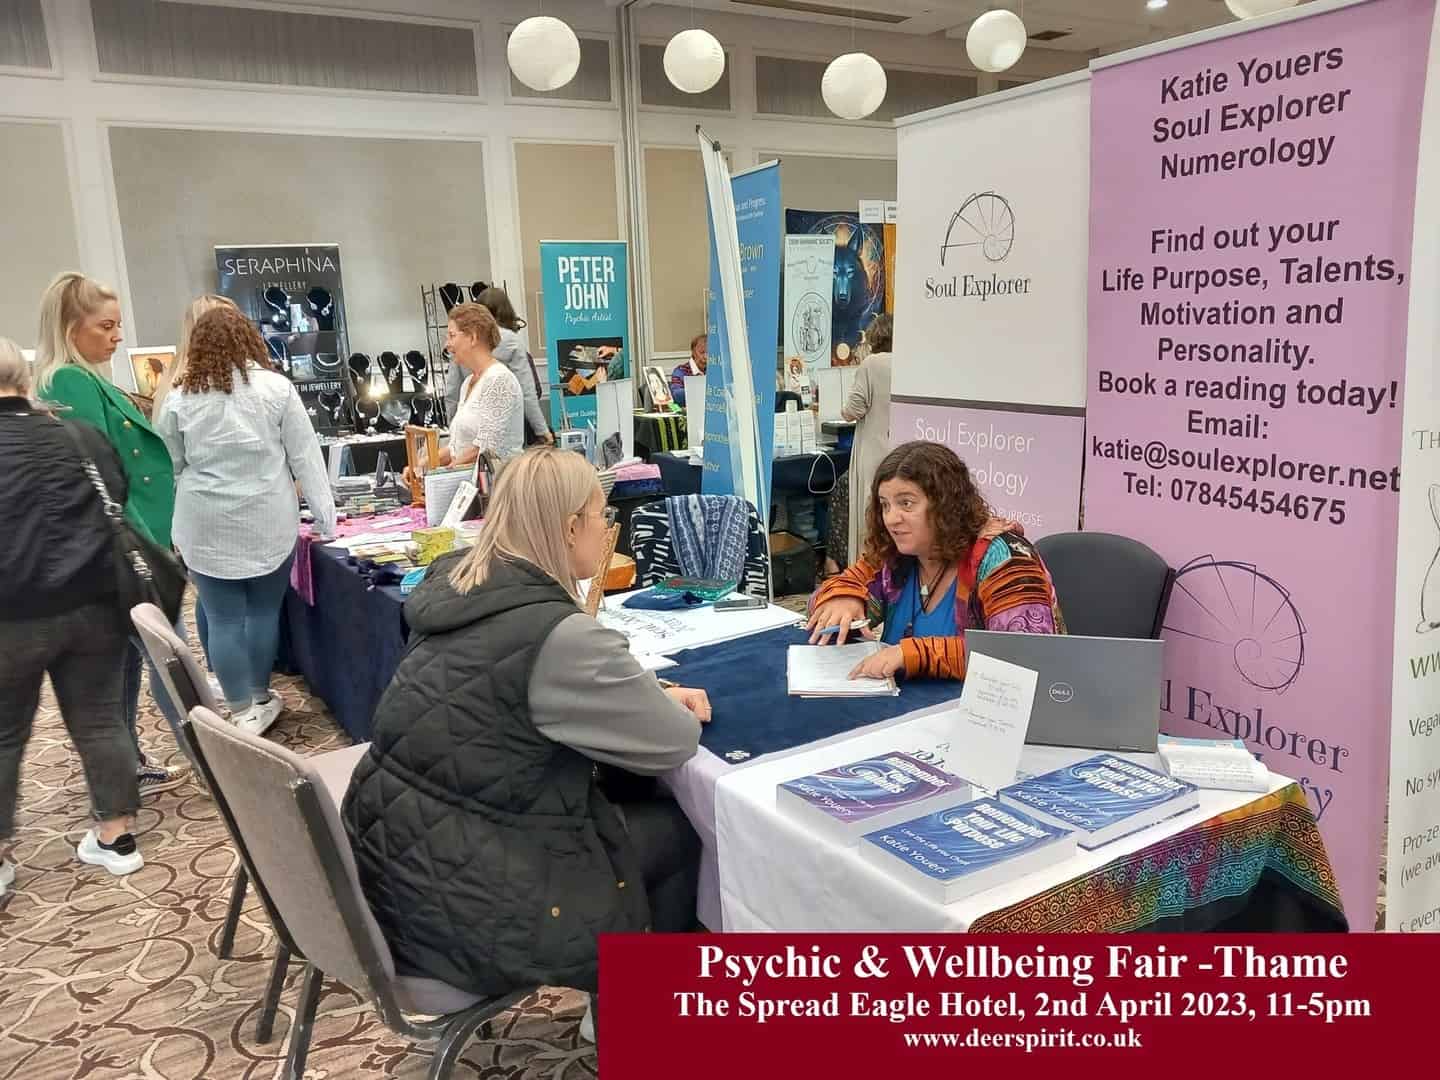 Psychic and Wellbeing Fair - Thame